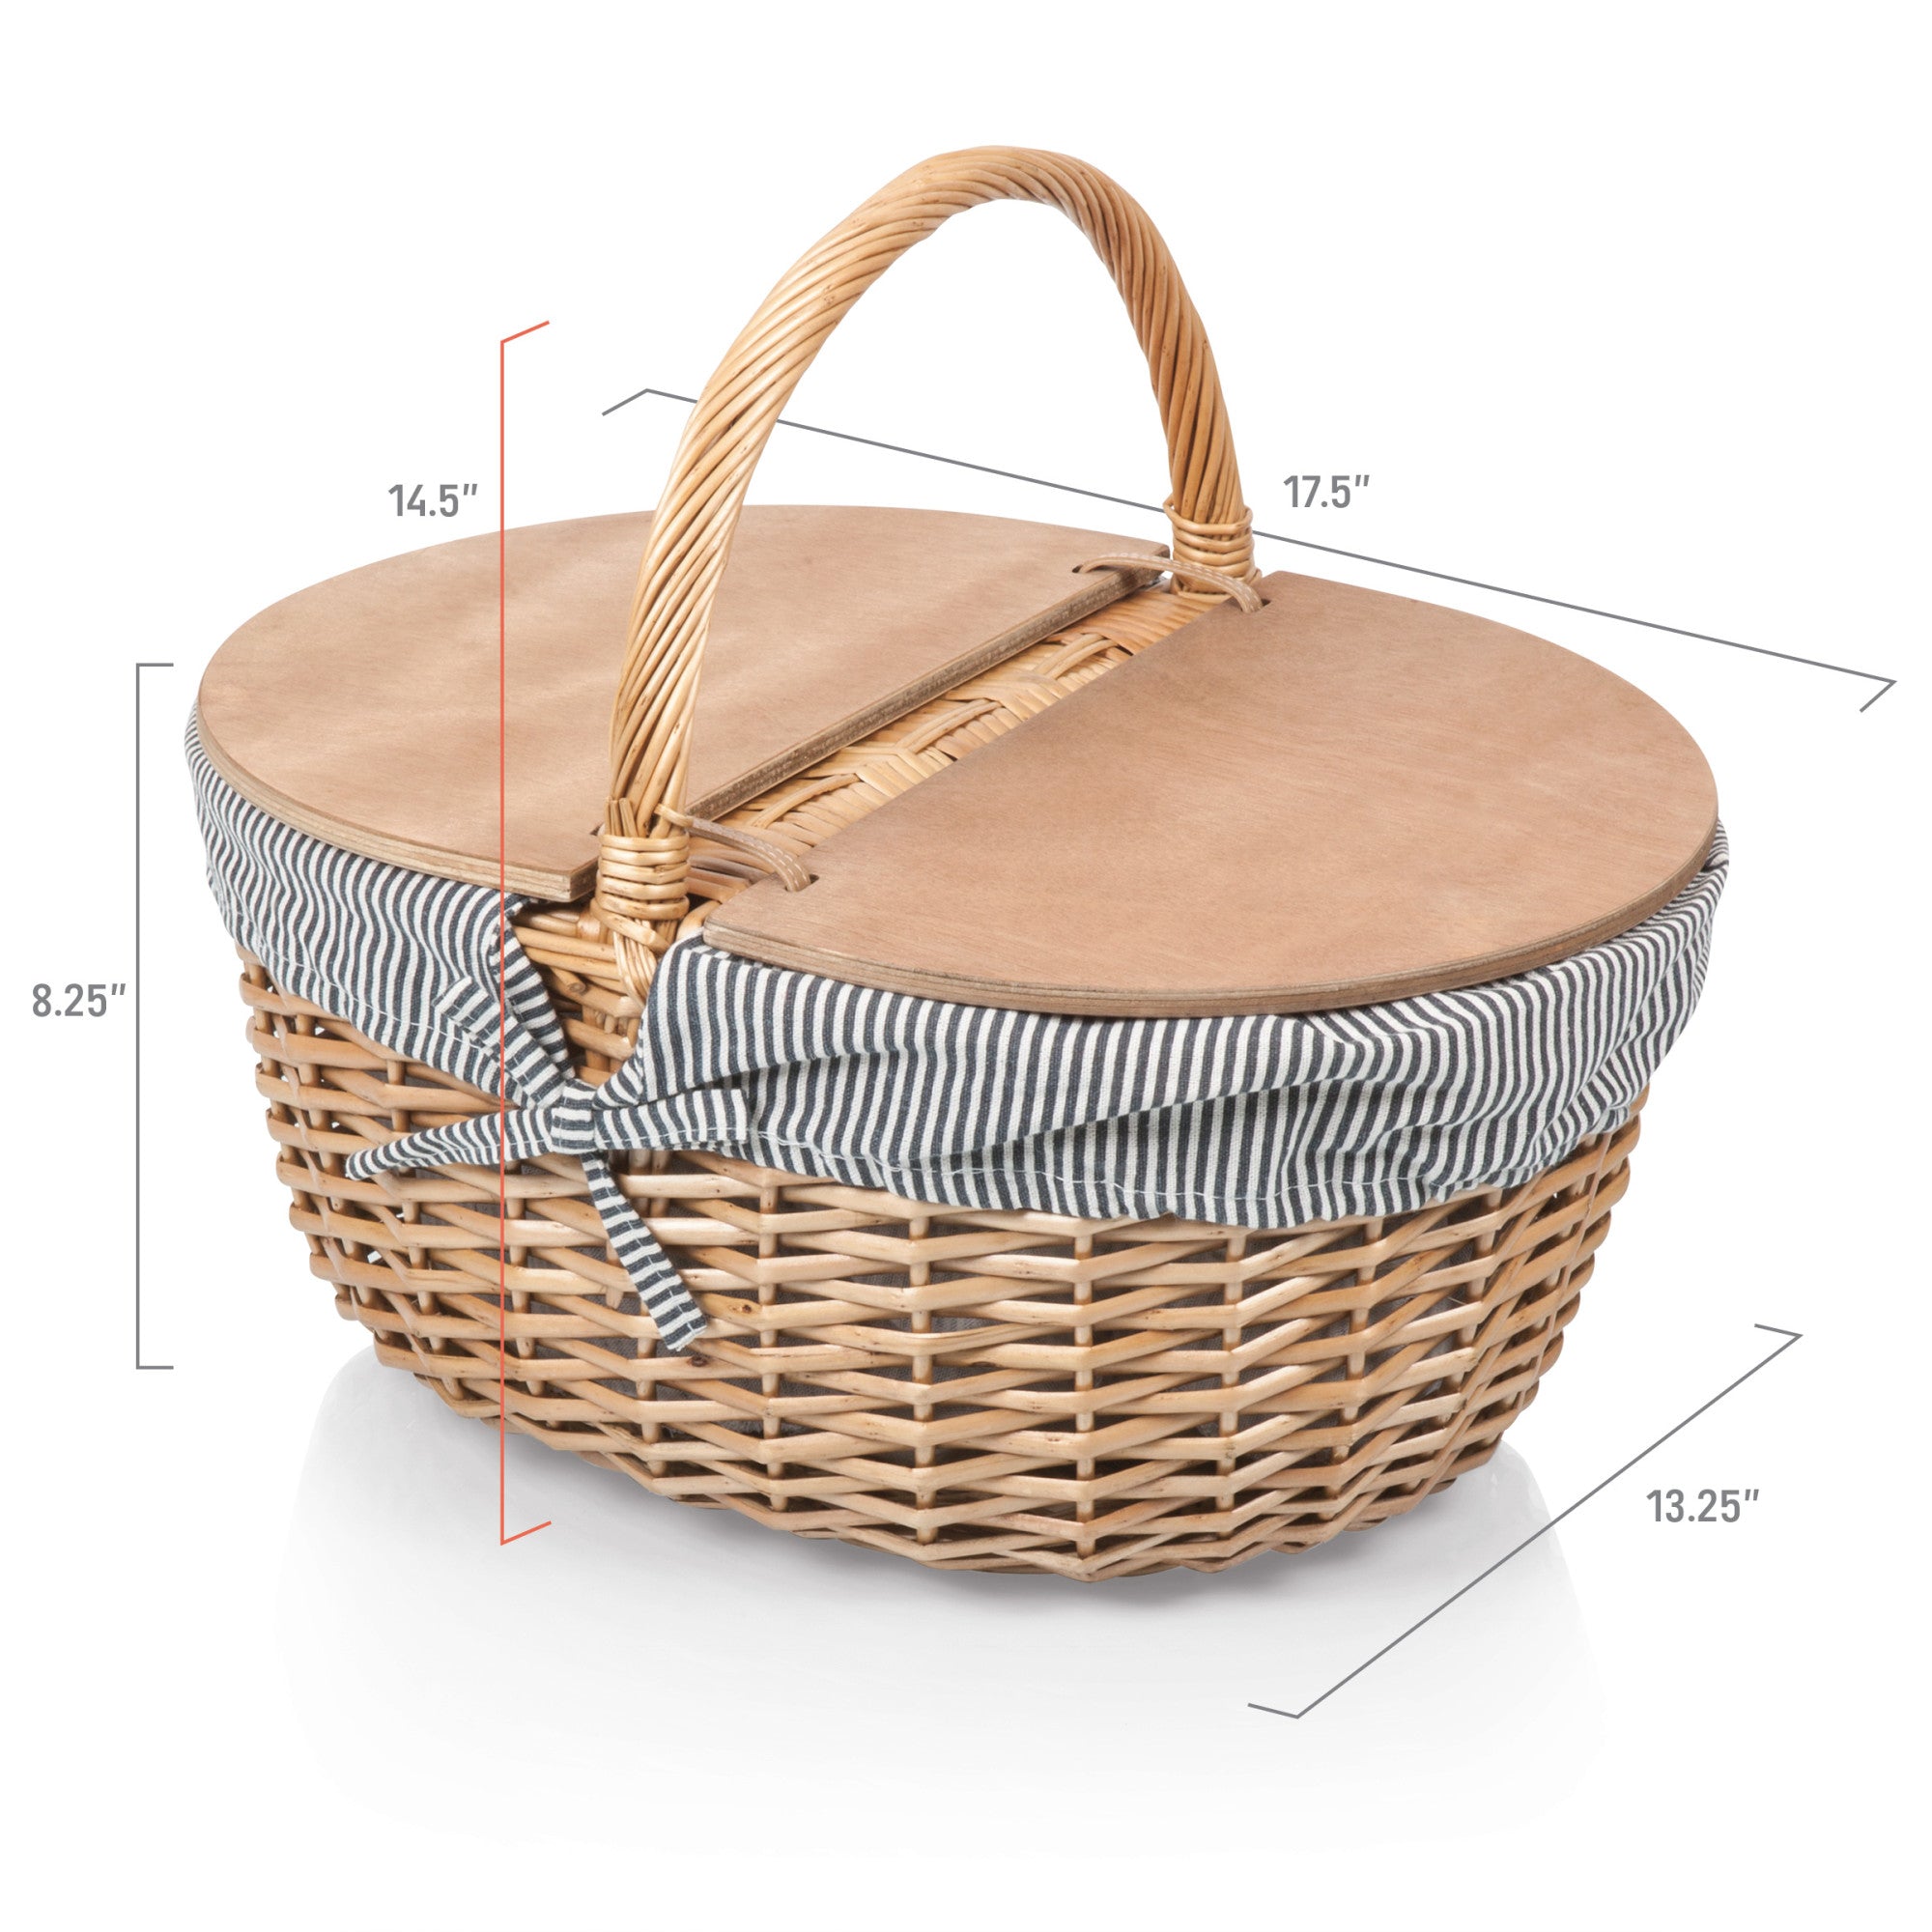 Winnie the Pooh - Country Picnic Basket